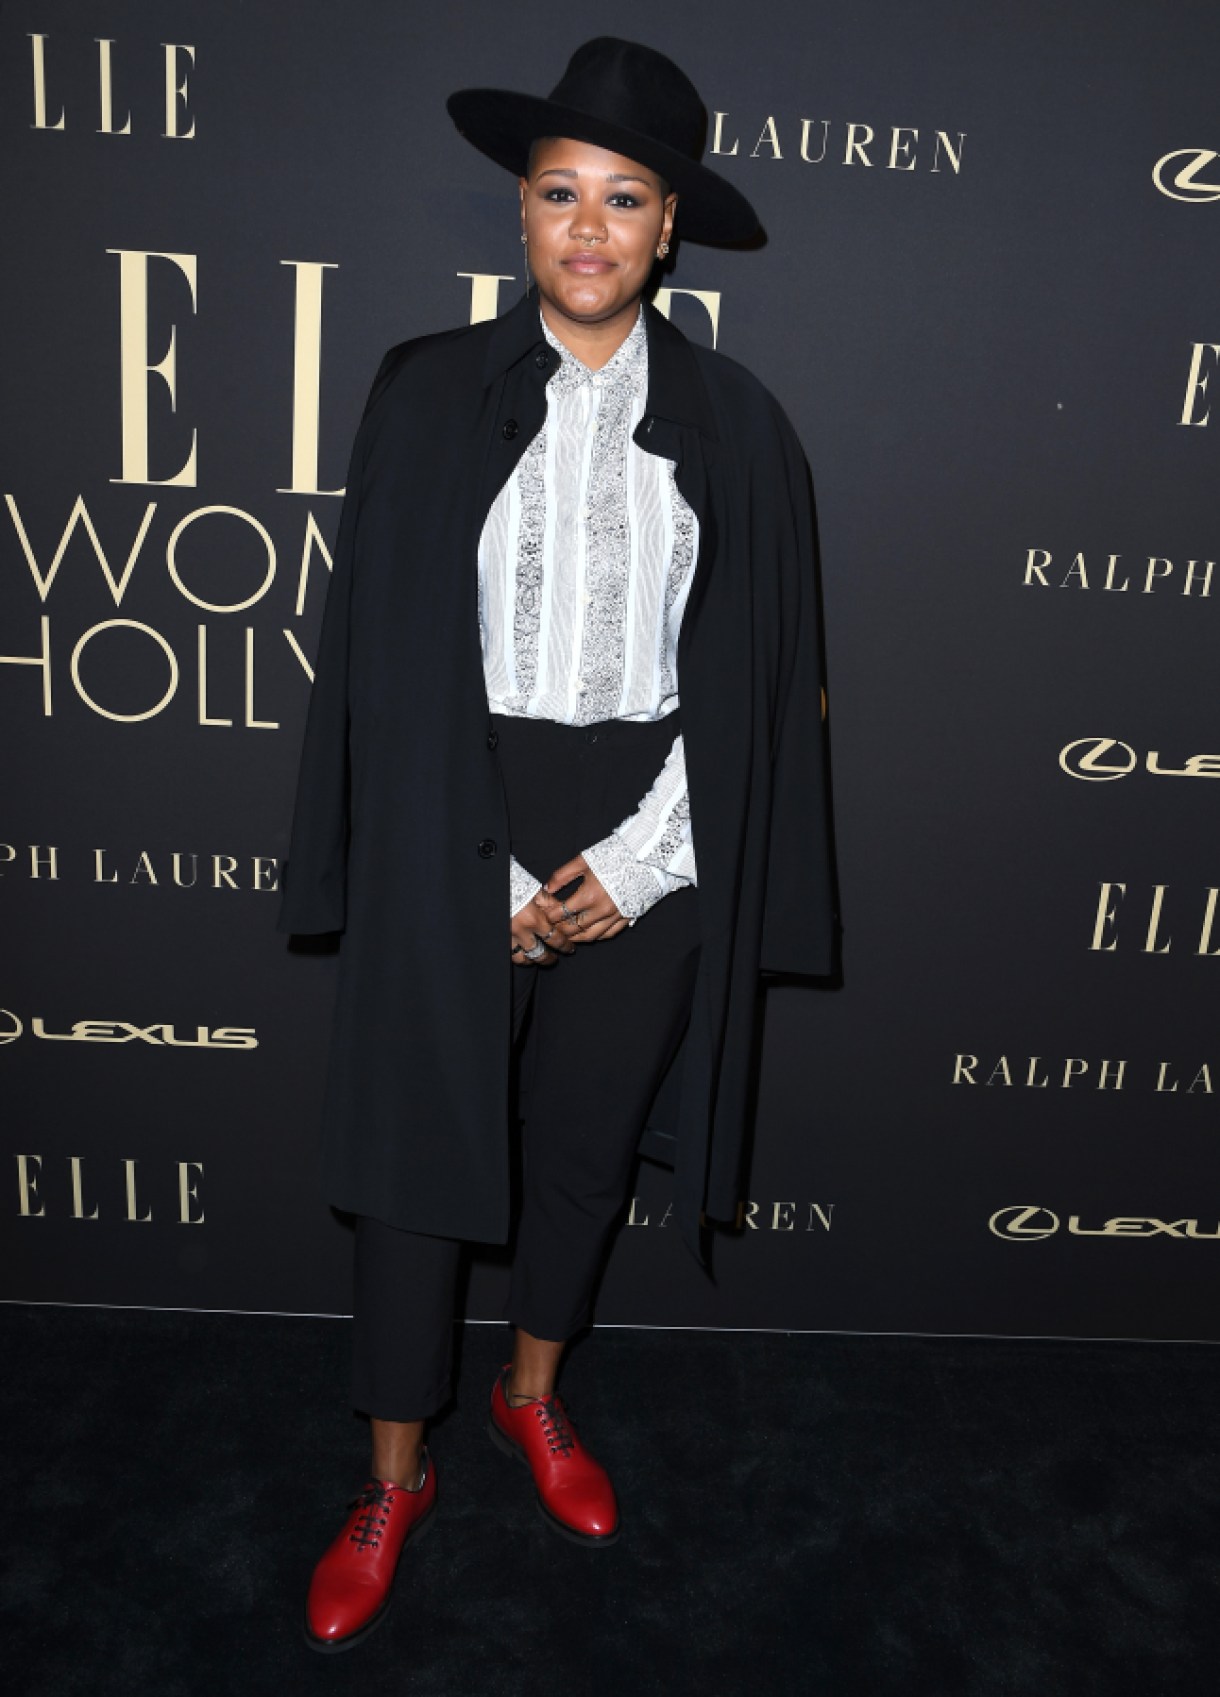 BEVERLY HILLS, CALIFORNIA - OCTOBER 14: Rahne Jones arrives at the 2019 ELLE Women In Hollywood at the Beverly Wilshire Four Seasons Hotel on October 14, 2019 in Beverly Hills, California. (Photo by Steve Granitz/WireImage)